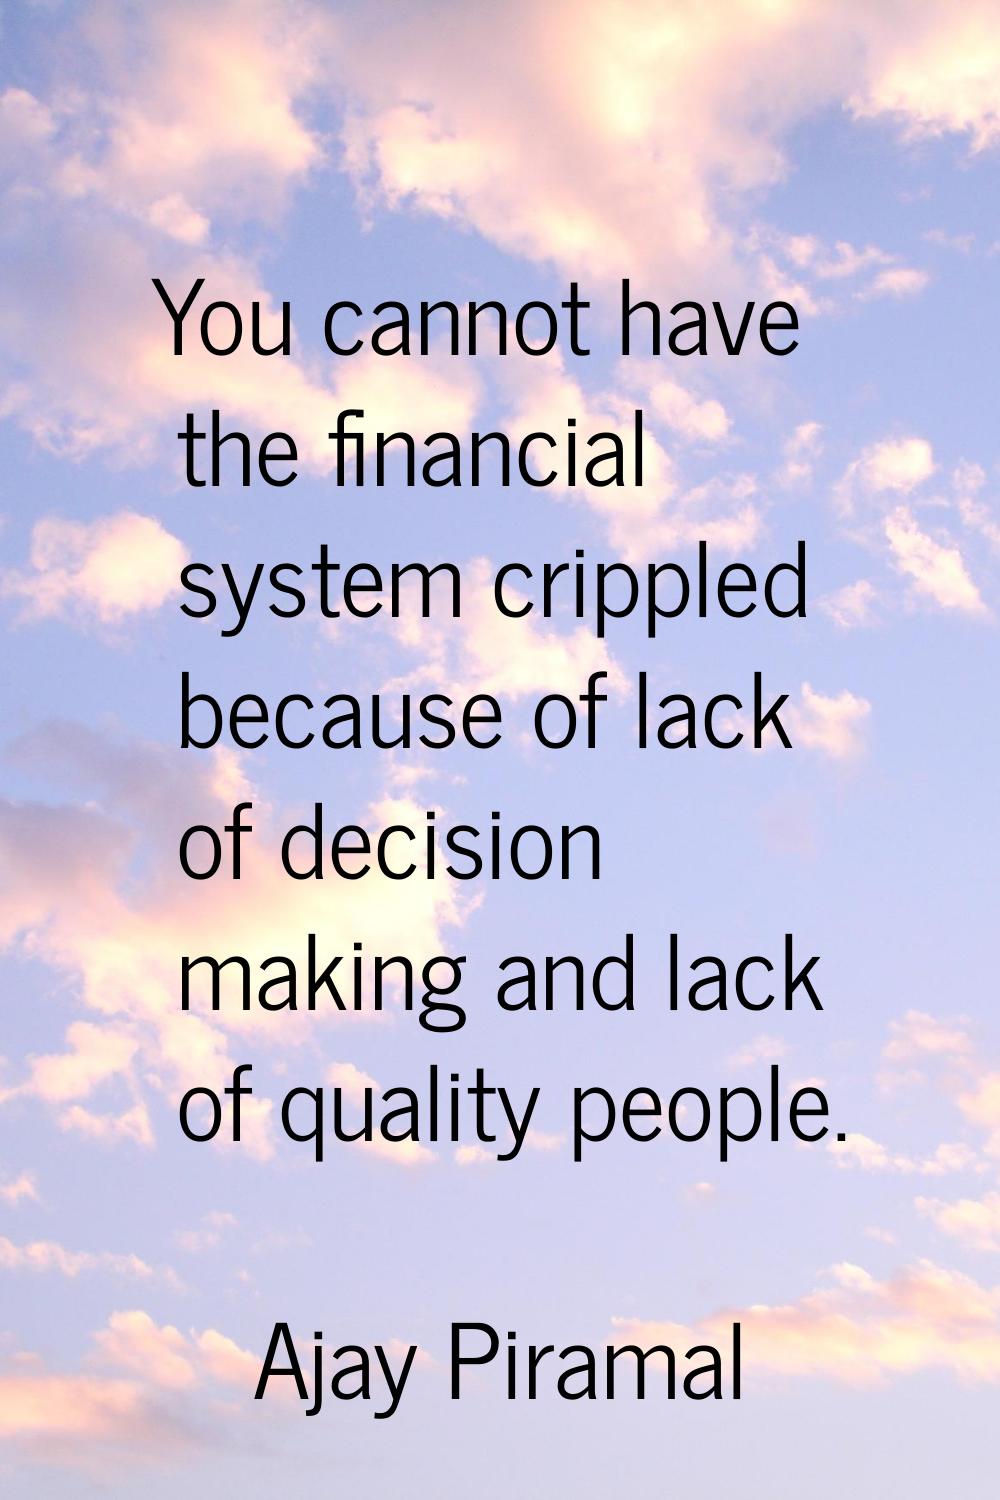 You cannot have the financial system crippled because of lack of decision making and lack of qualit